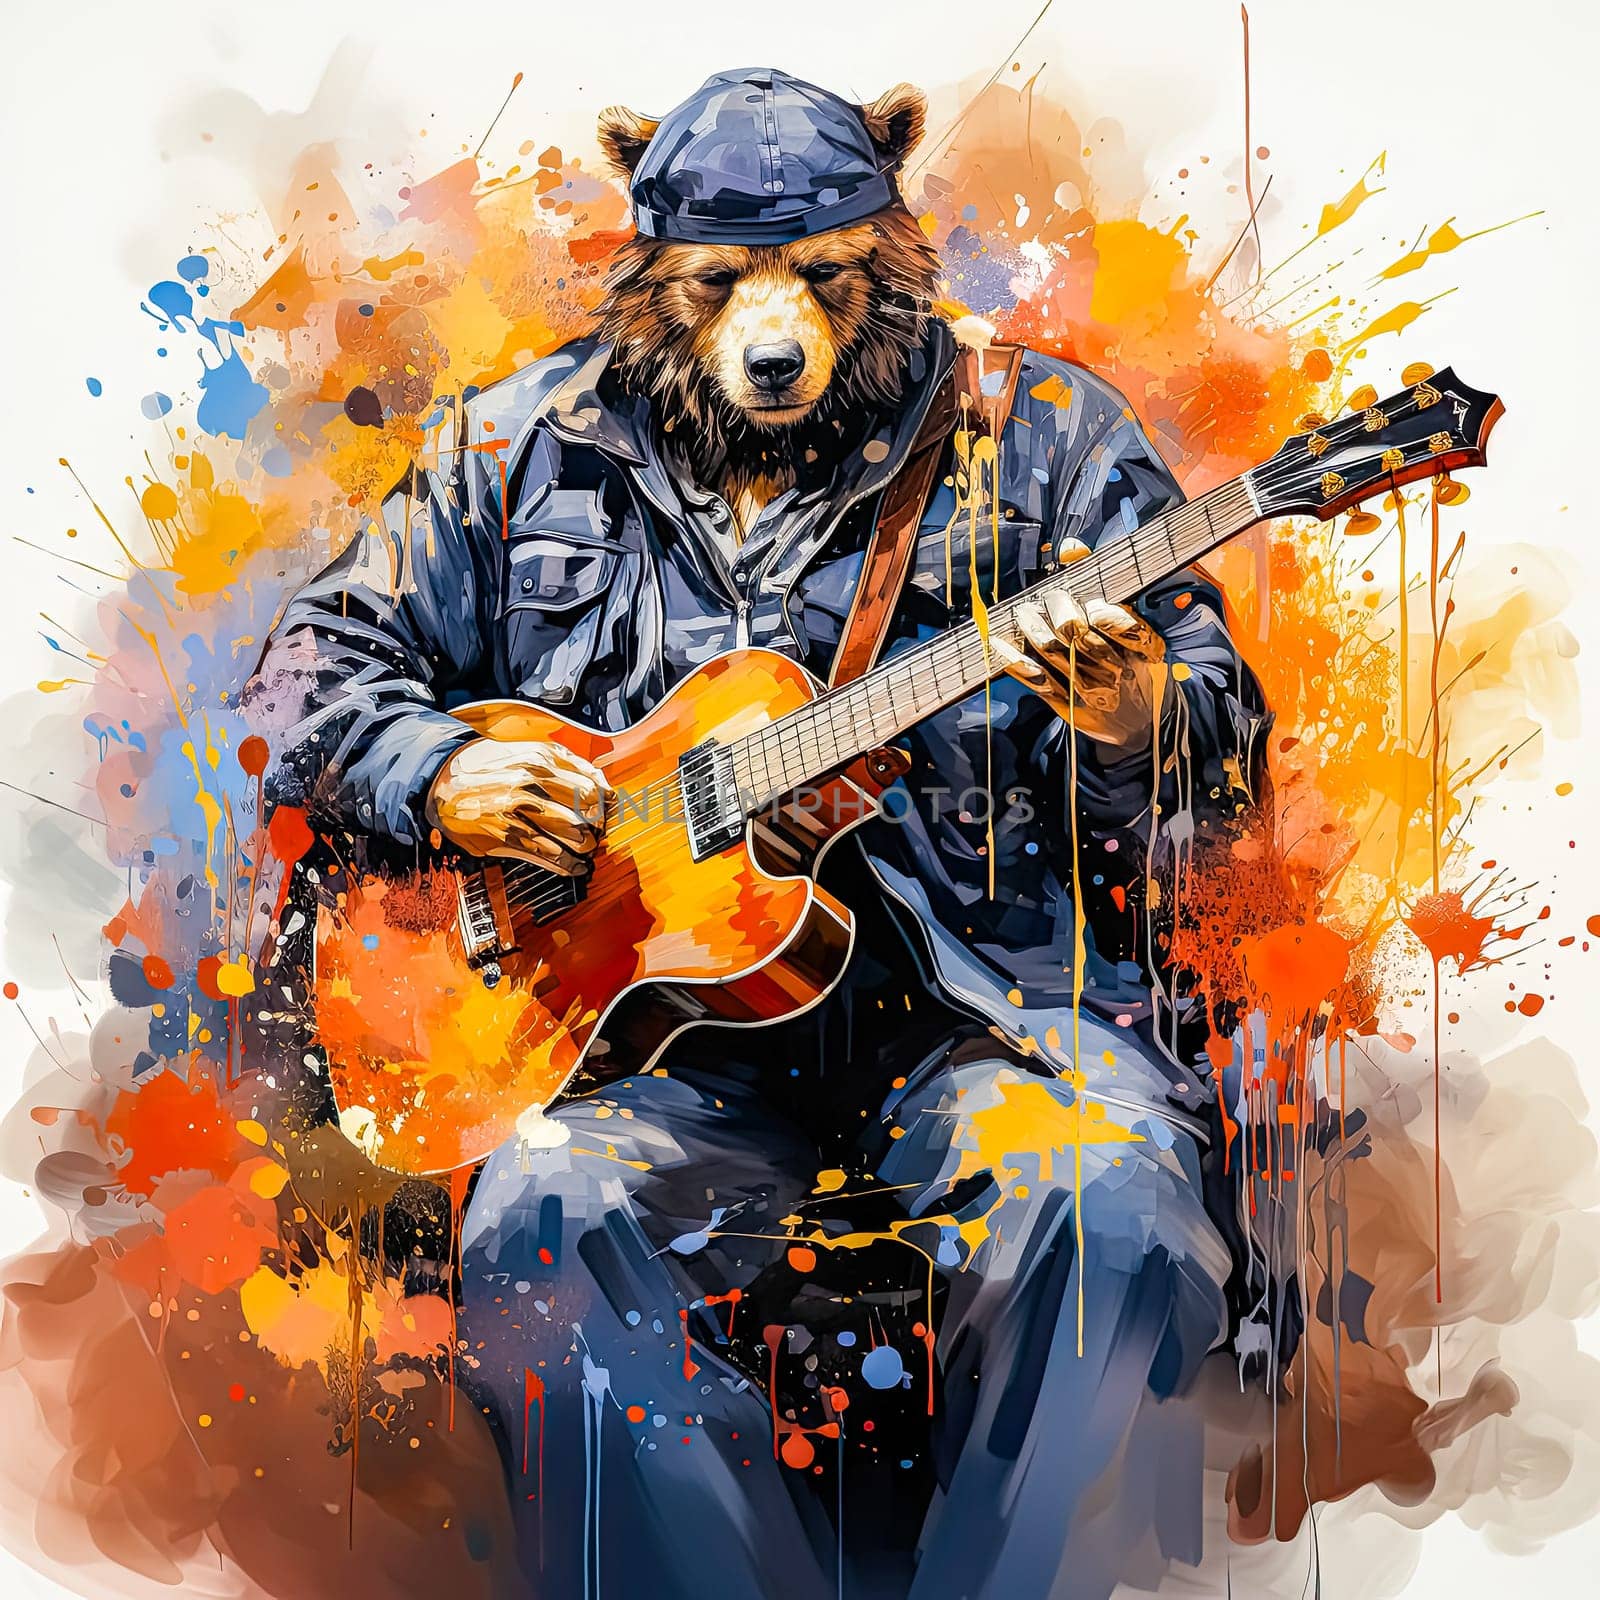 bear in a blue suit plays a guitar, against a background of watercolor splashes, AI generation